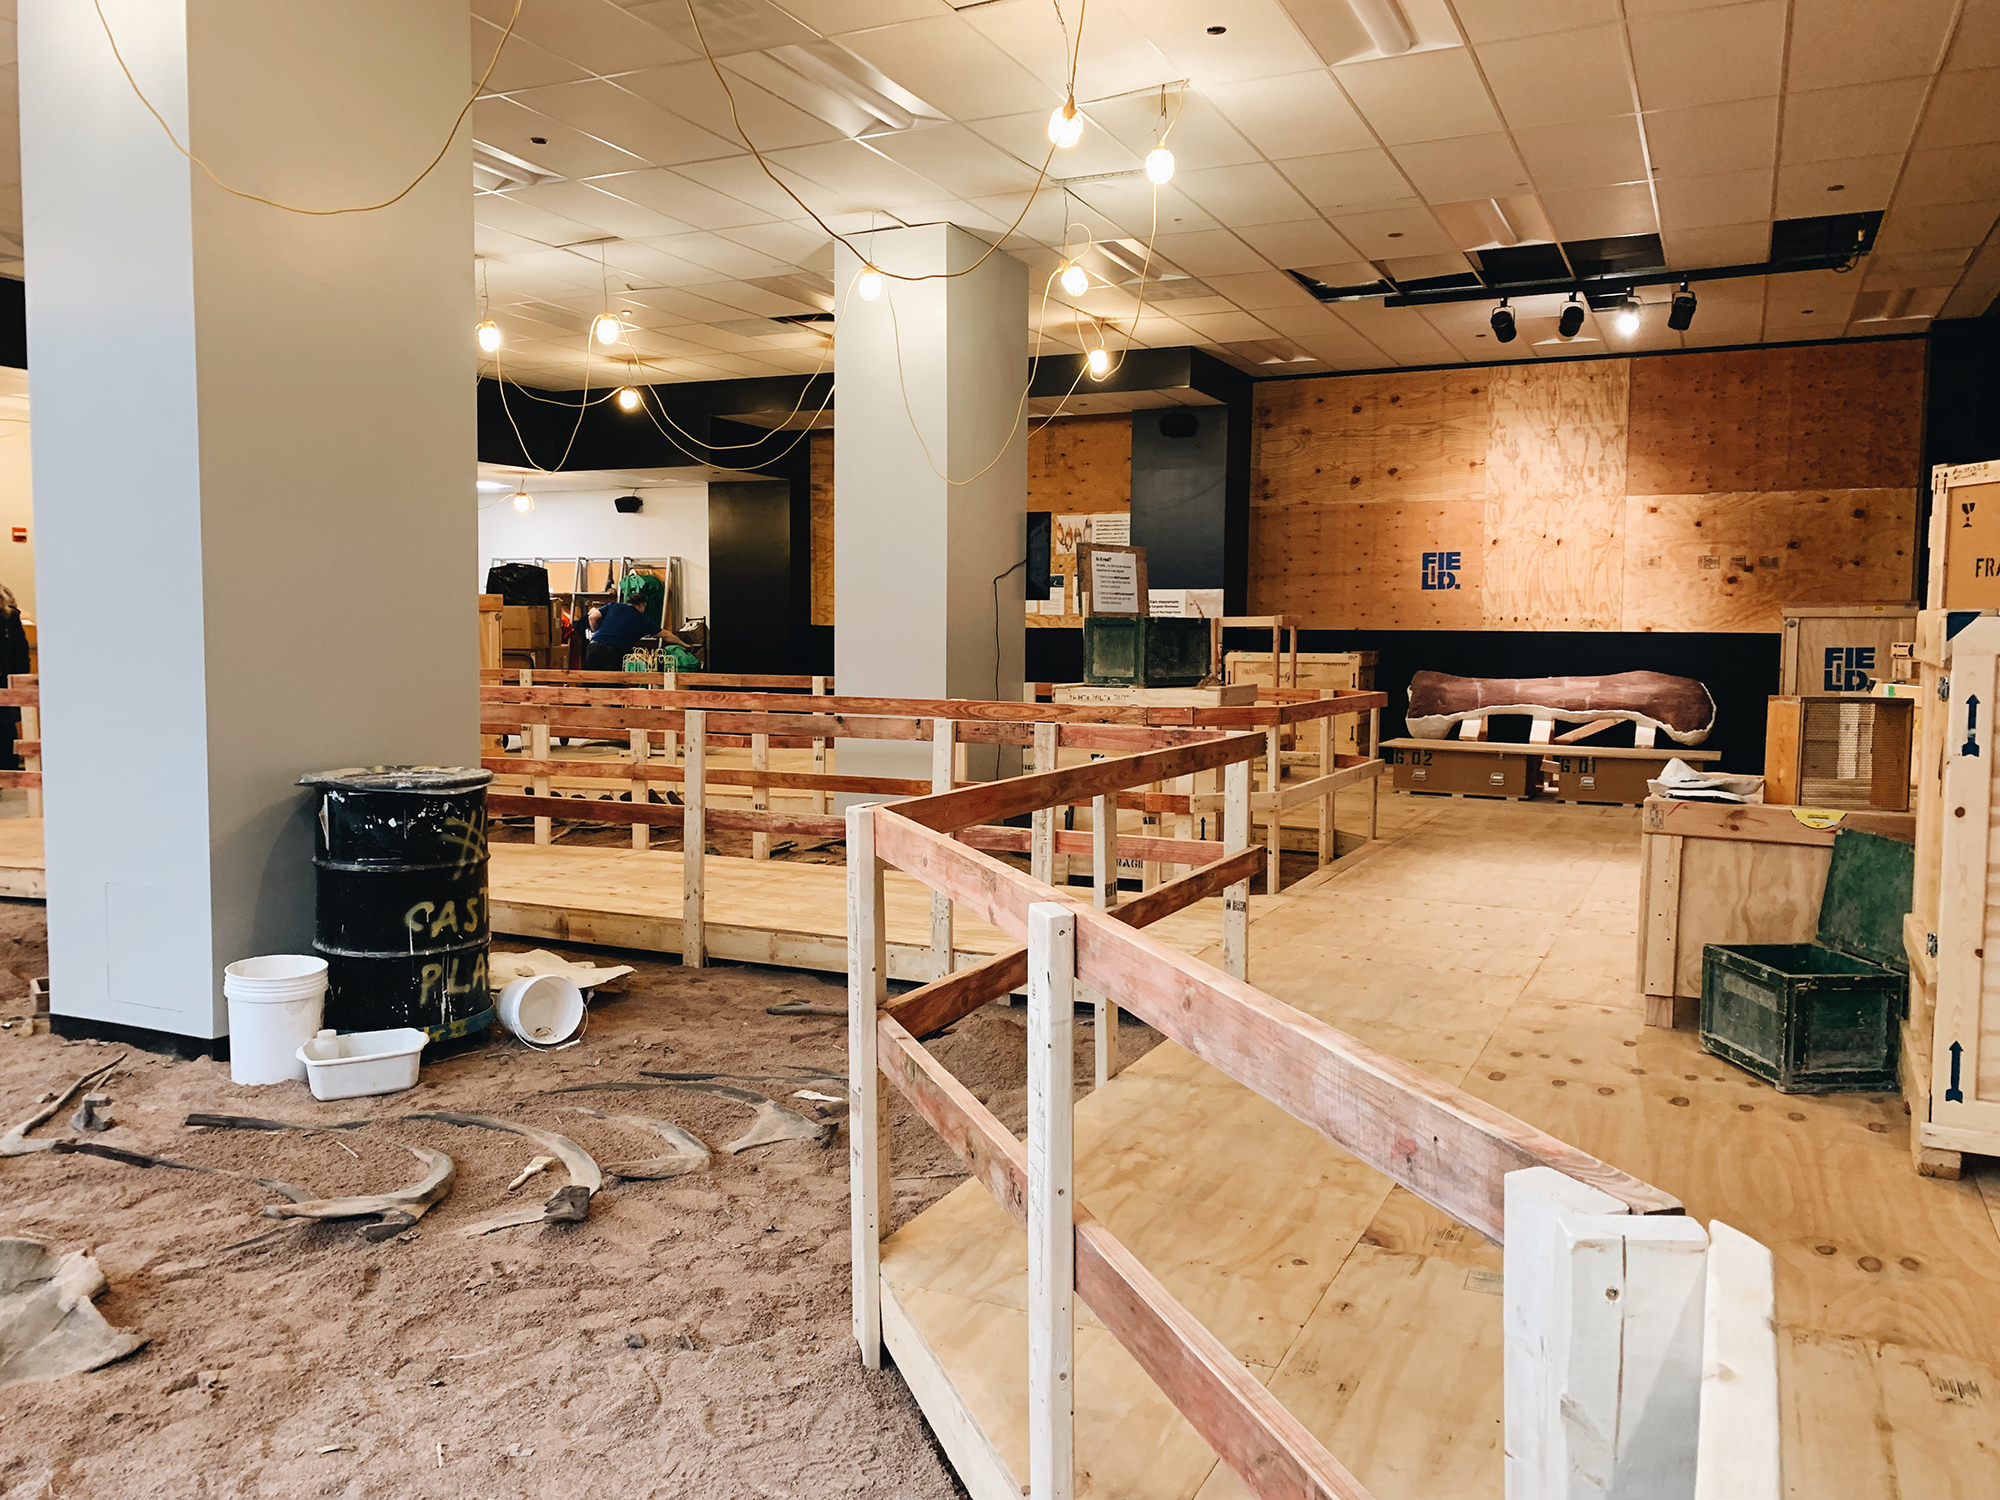 A view of the pop-up store, made to look like a field dig site. A wooden fence runs through the center of the space, dividing a sandy pit filled with fake fossils and tools from a raised, wooden platform.